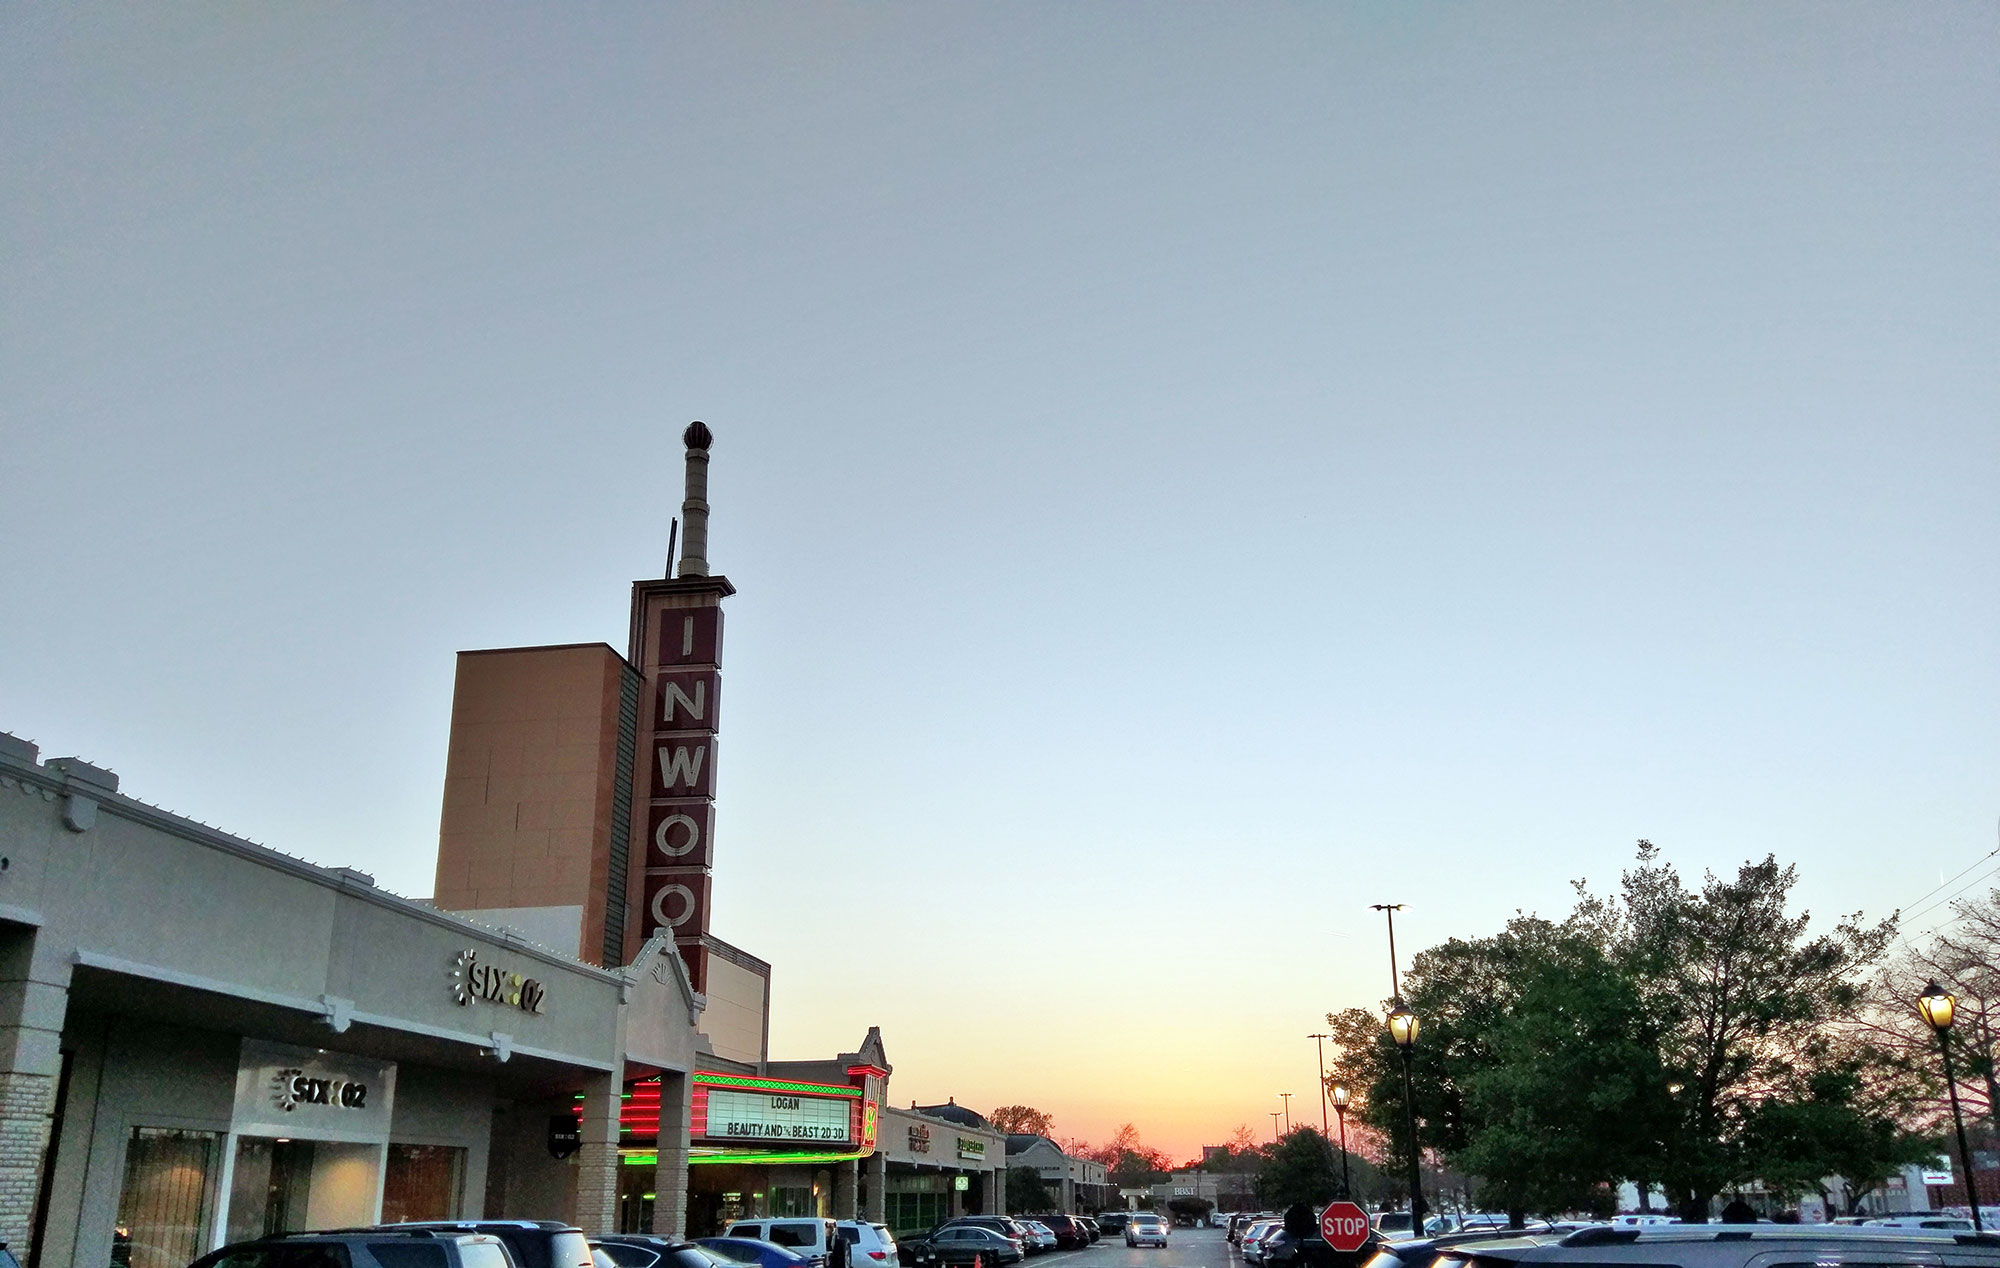 The Inwood theatre in Dallas, Texas